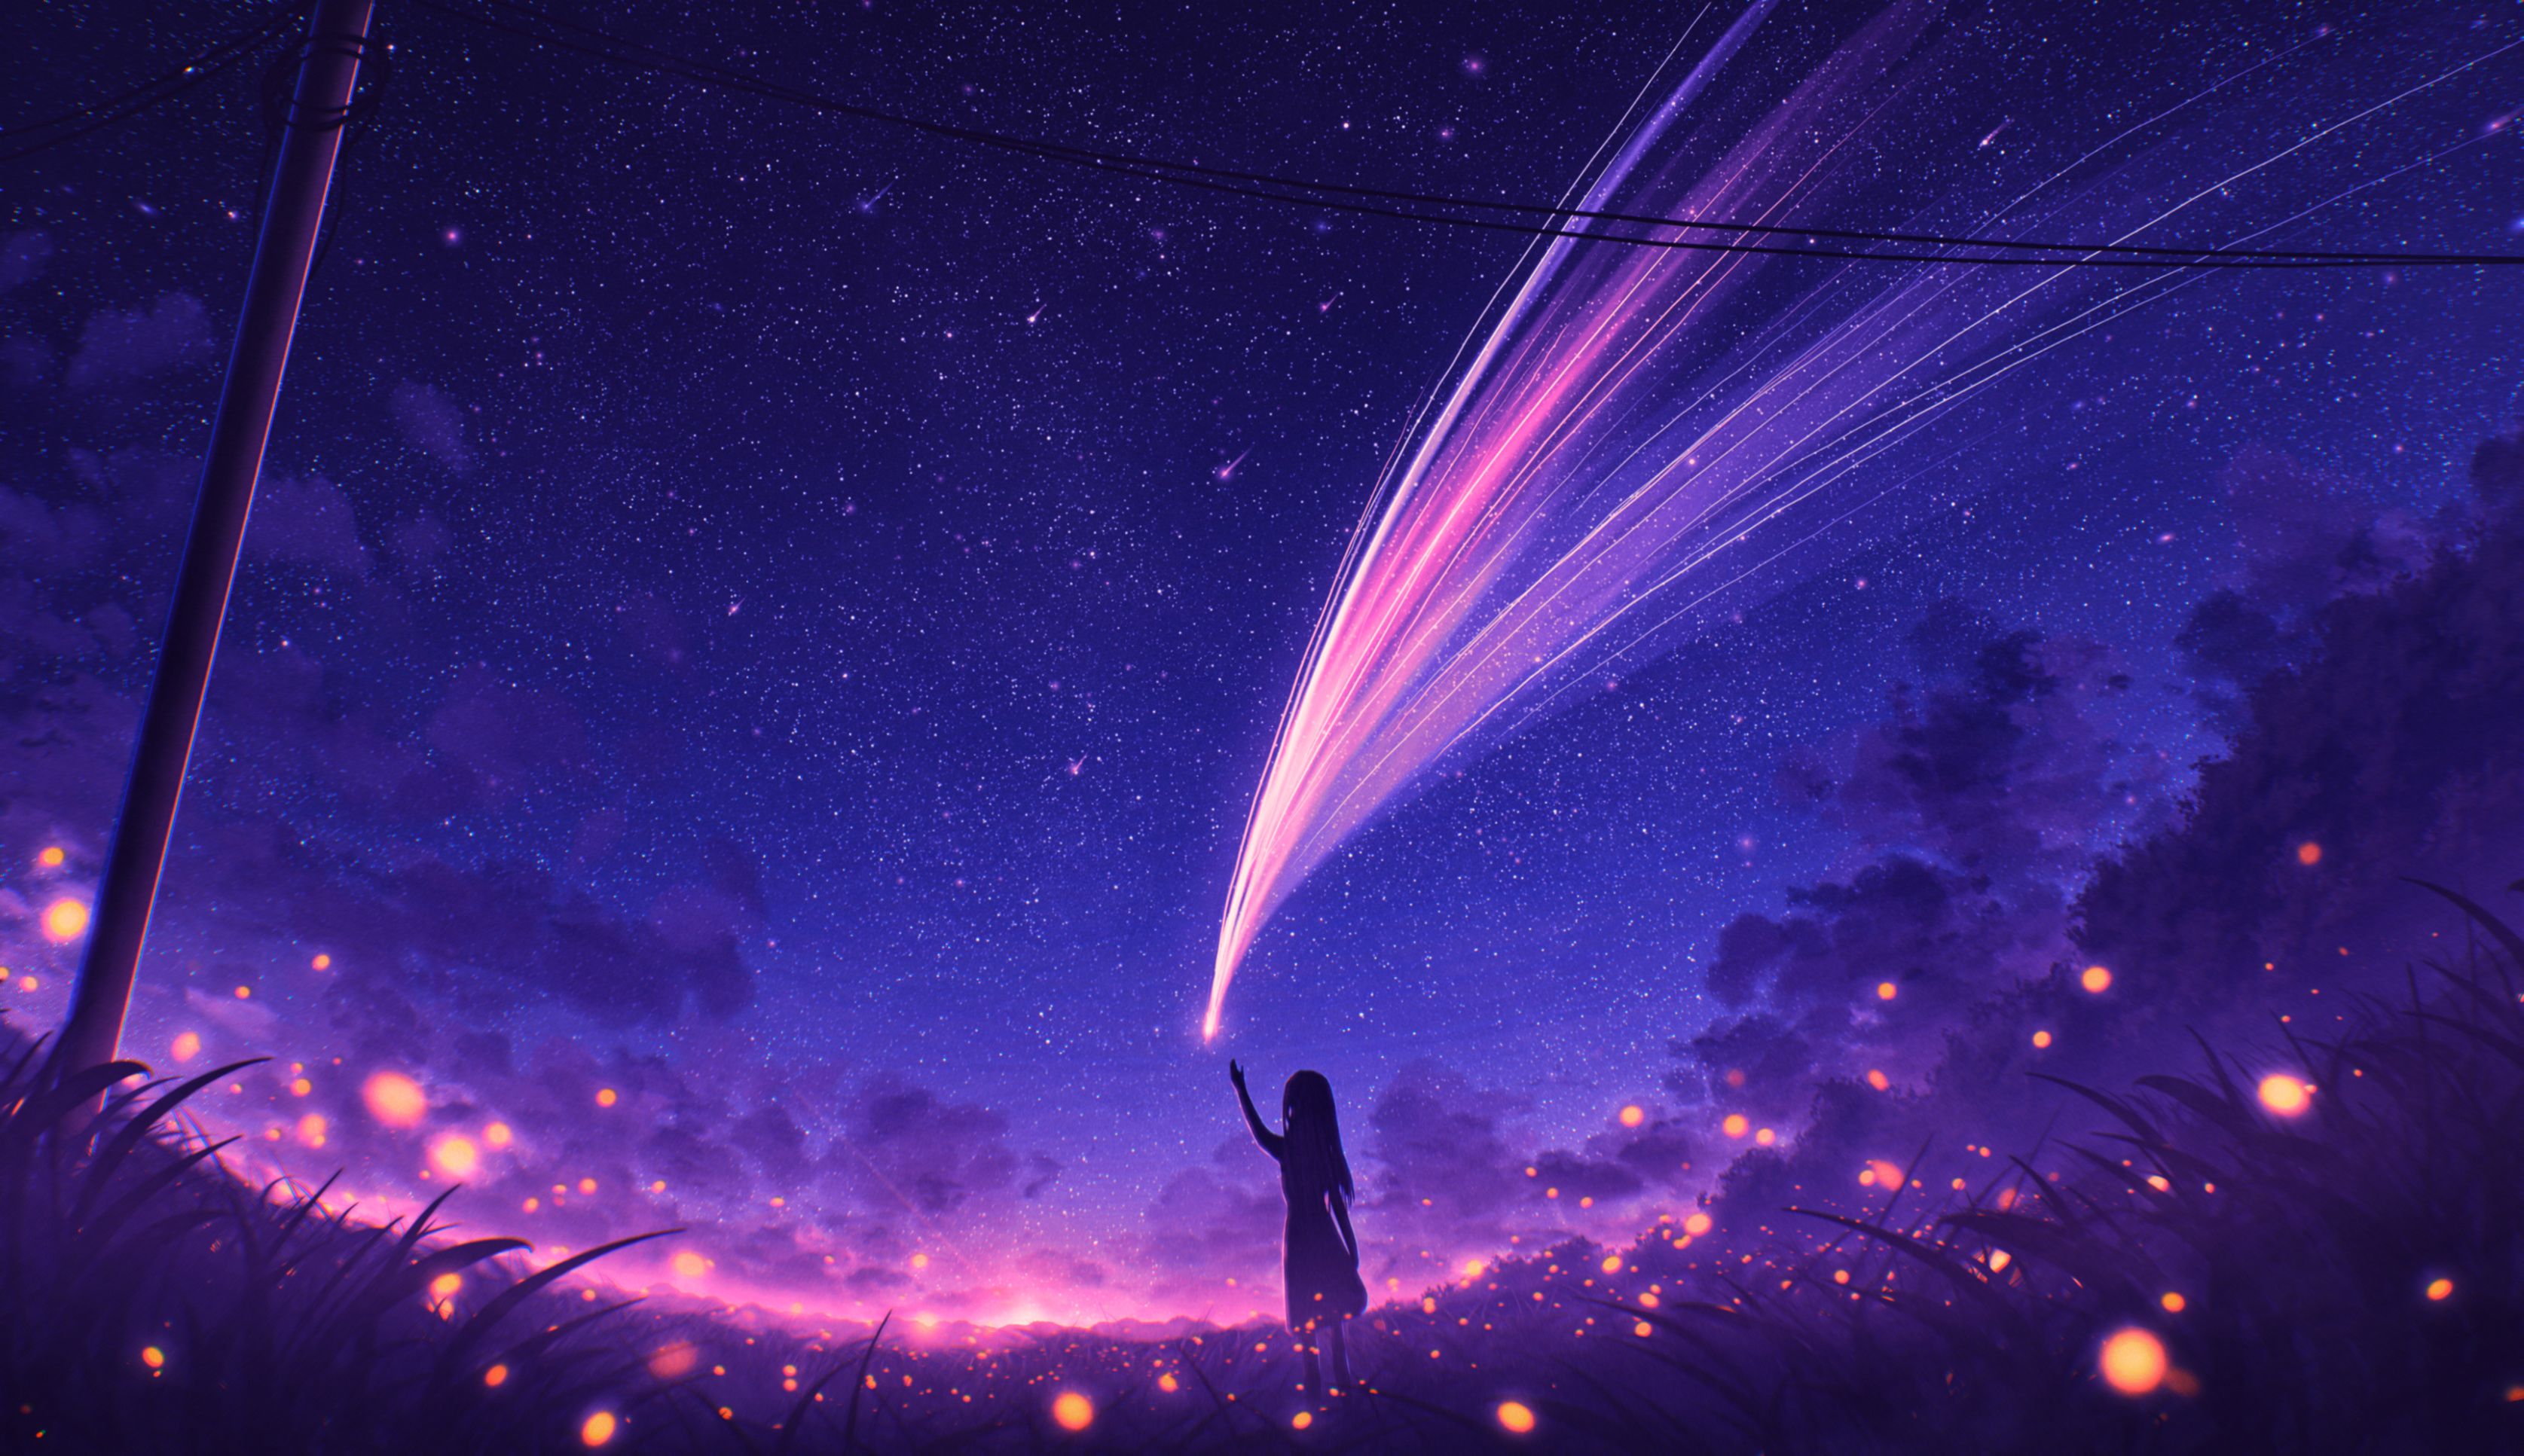 Anime Girl and Cool Starry Sky iPhone 6 plus Wallpaper, HD Anime 4K Wallpaper, Image, Photo and Background